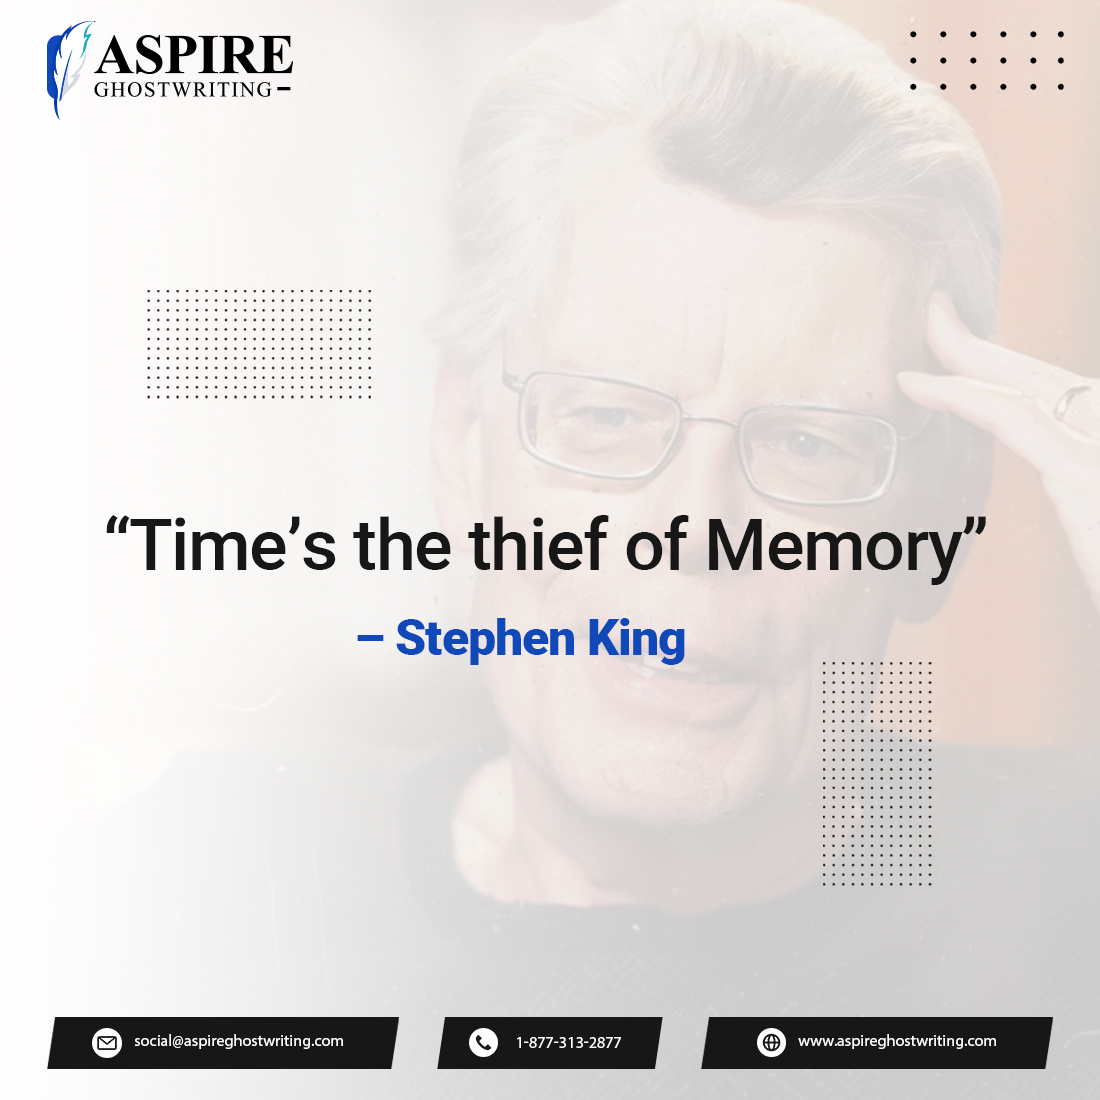 Stephen King's words in The Gunslinger remind us of the importance of preserving memories amidst the relentless phase of time.

#aspireghostwriting #lineediting #writingstyle #bookmarketing #bookpublishing #bookwriting #bookediting